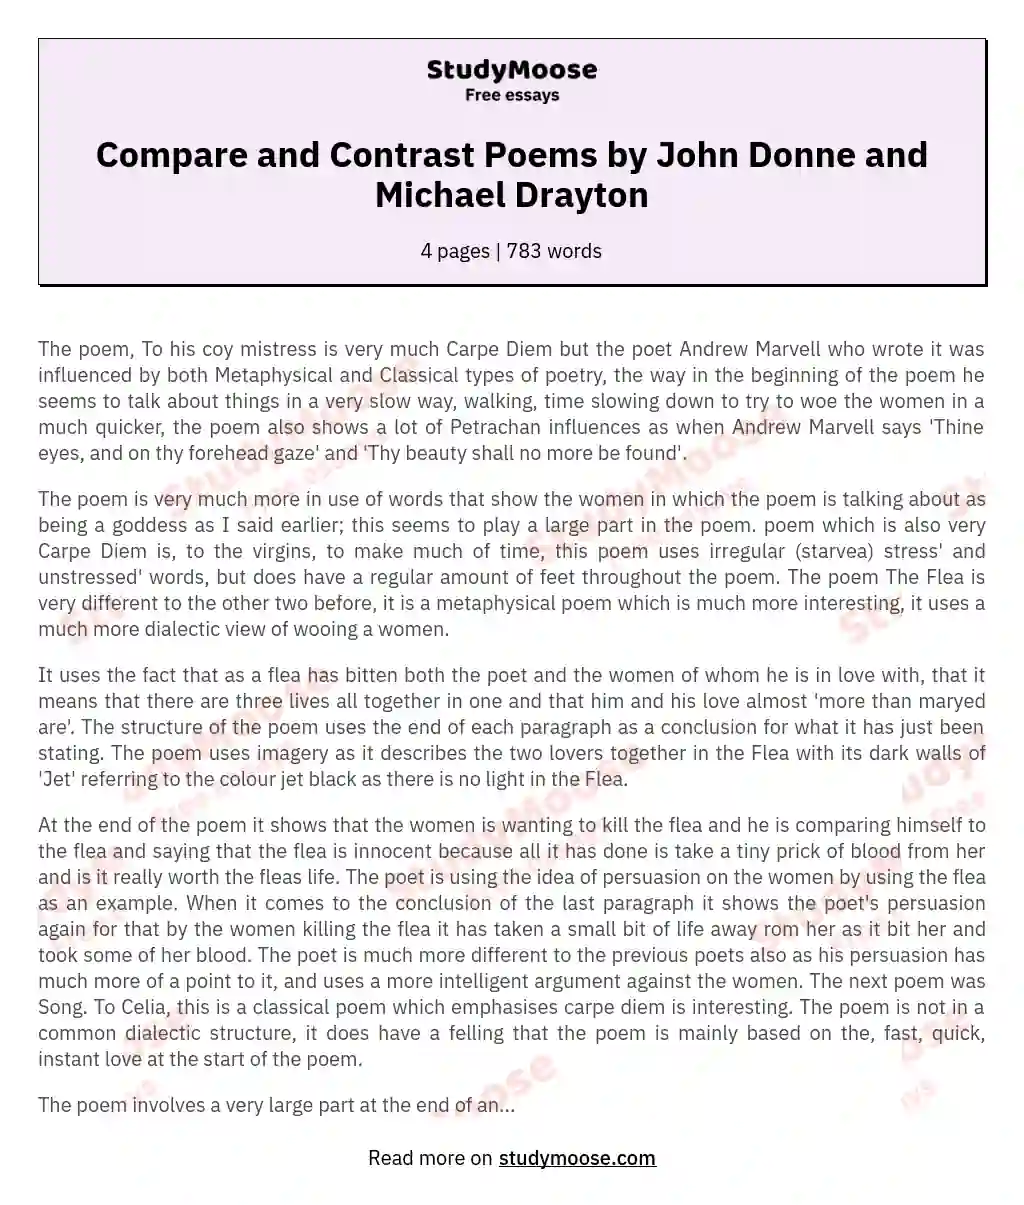 Compare and Contrast Poems by John Donne and Michael Drayton essay